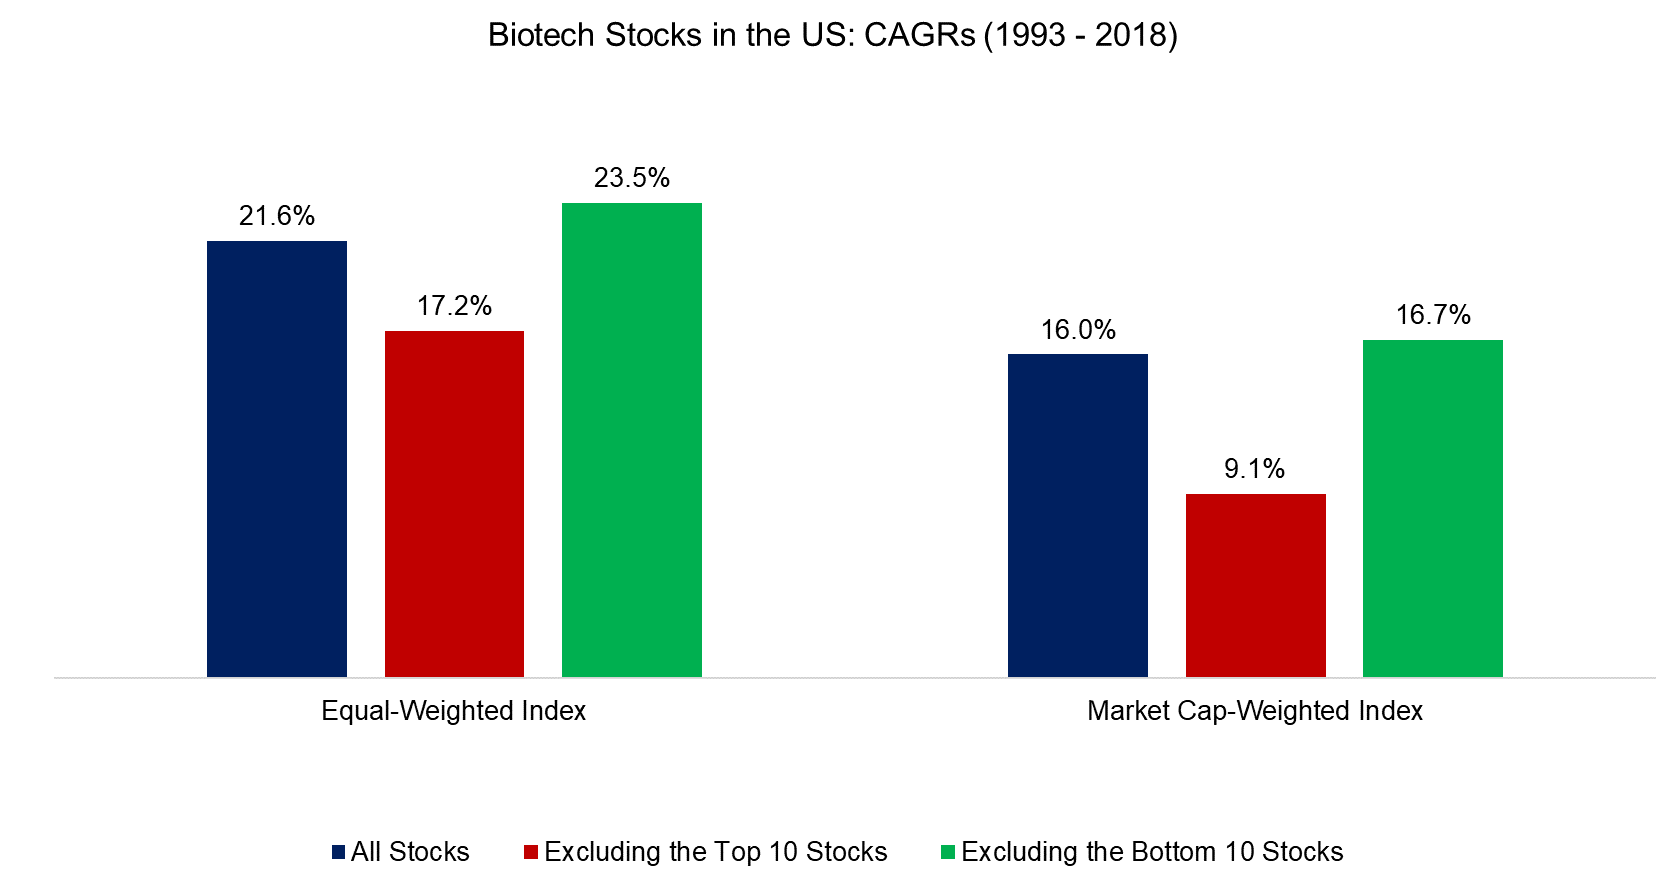 Biotech Stocks in the US CAGRs (1993 - 2018)